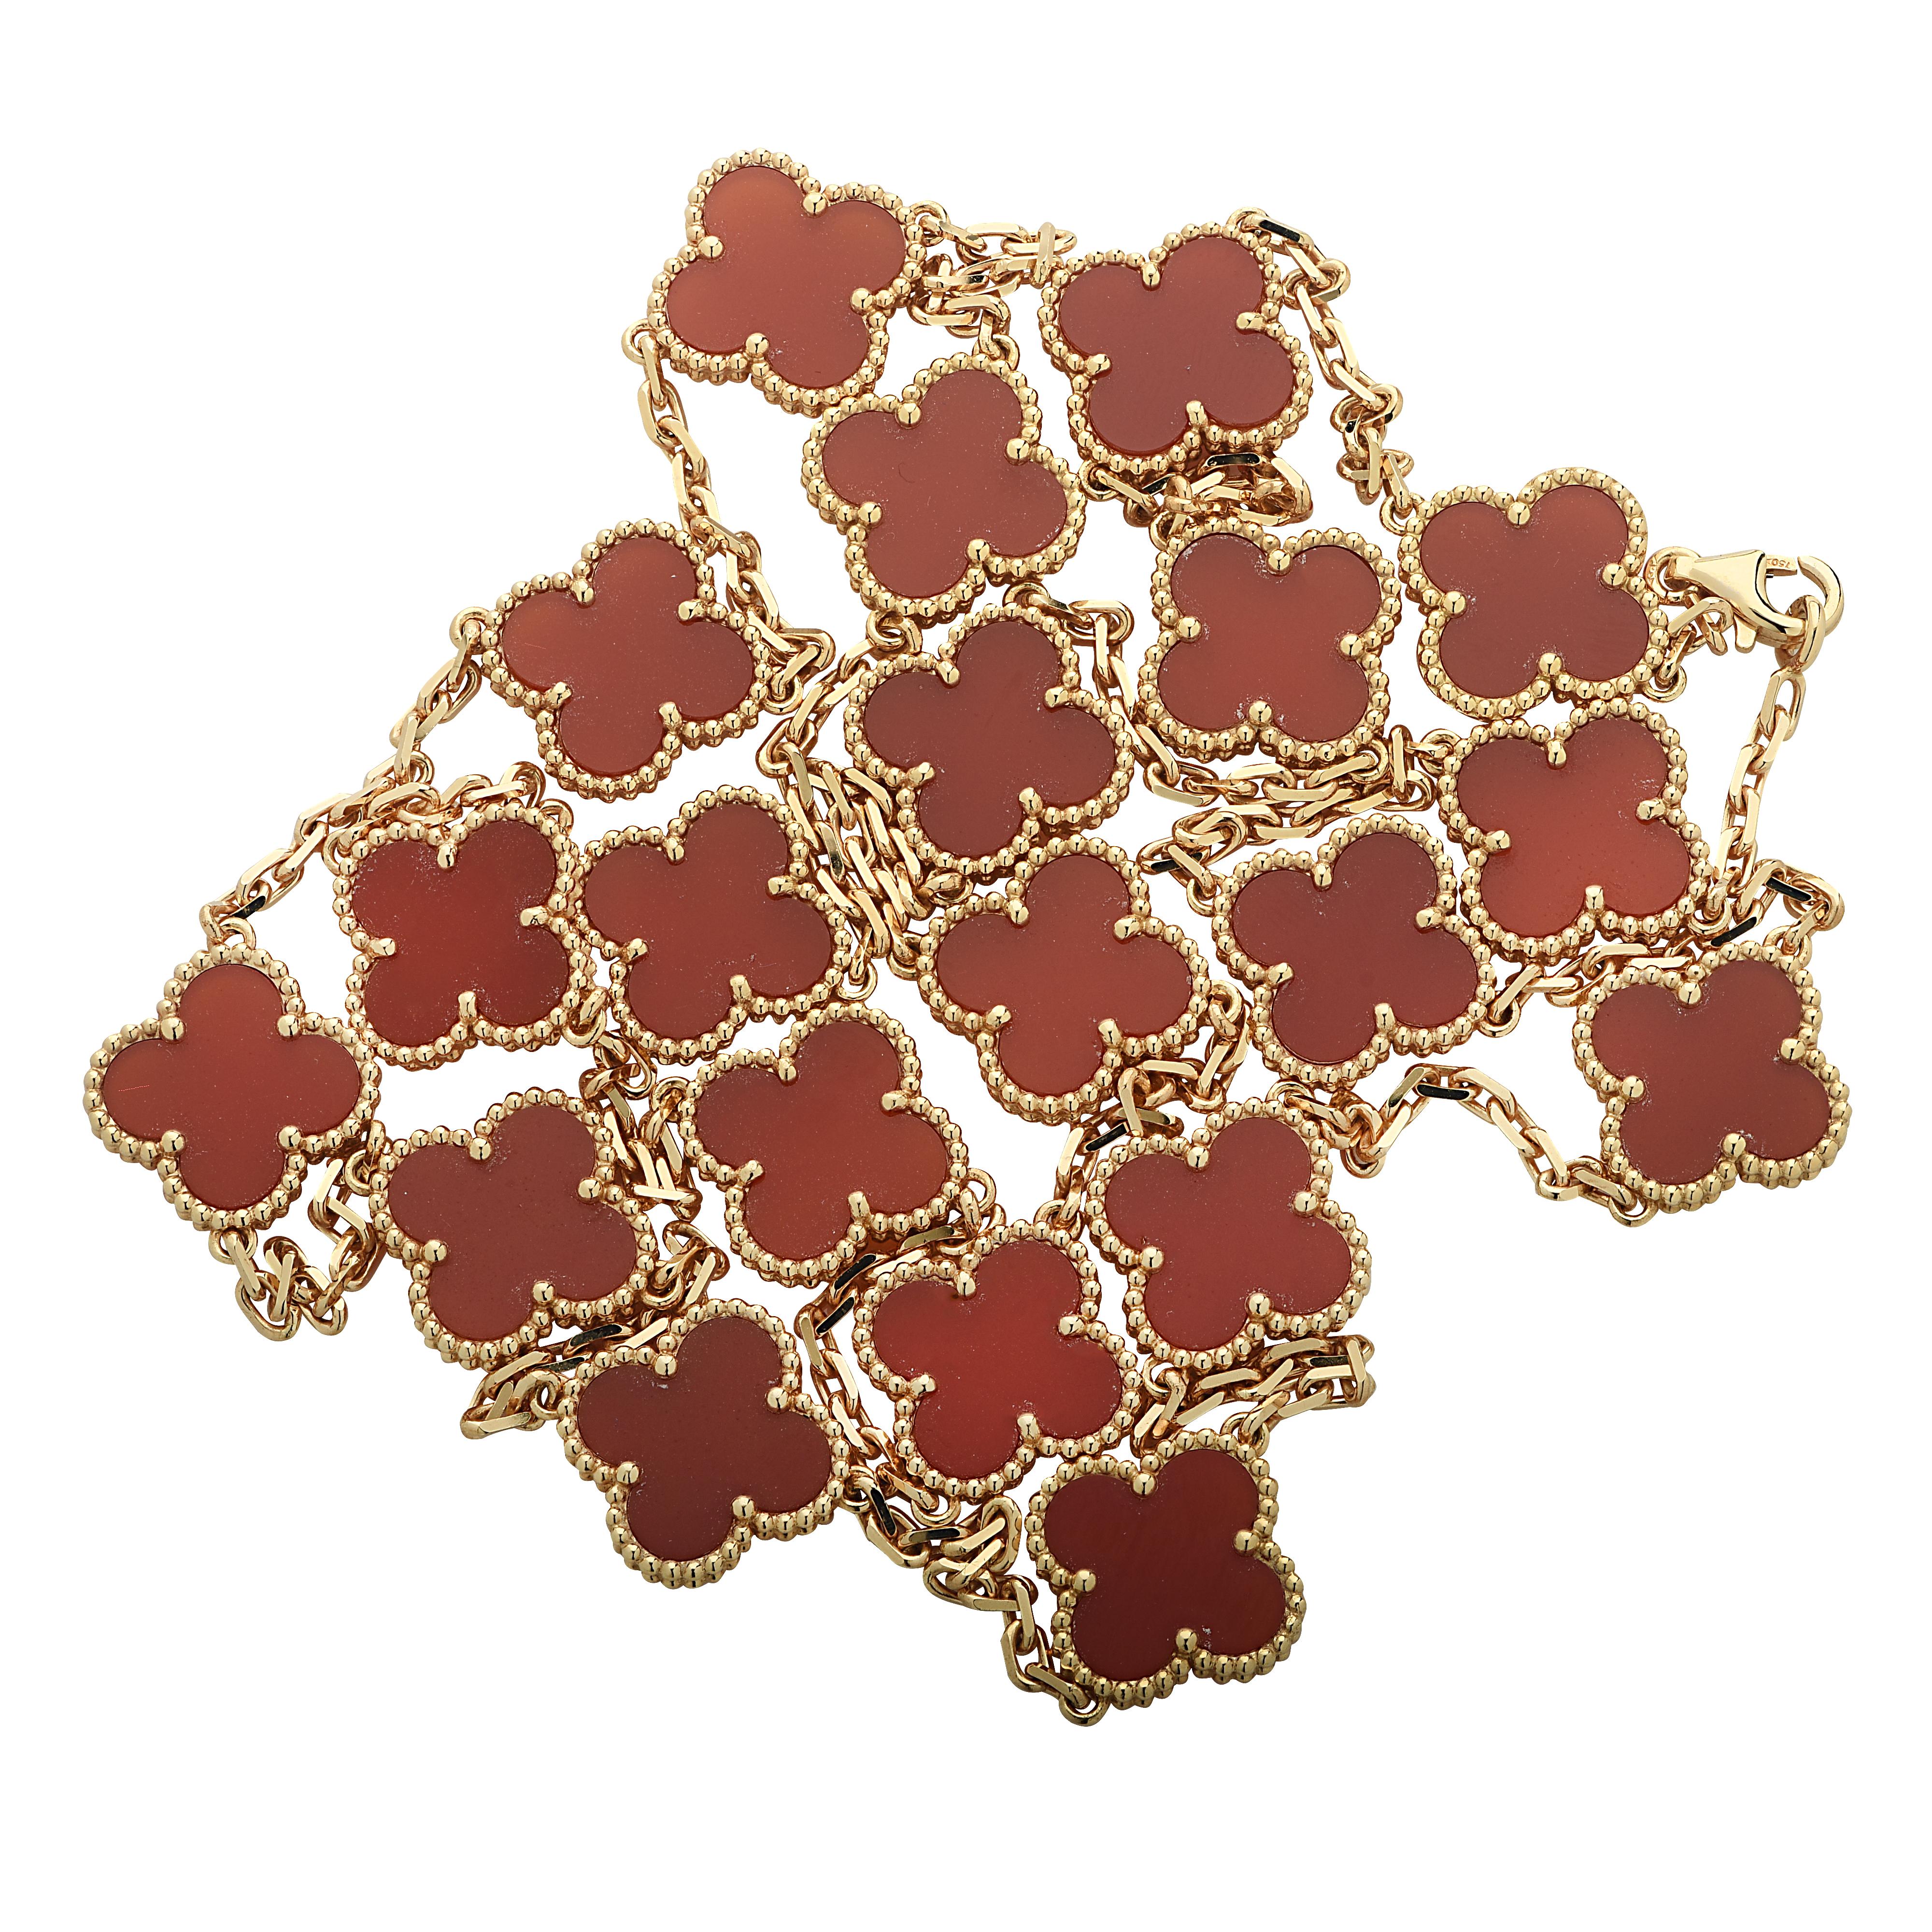 From the House of Van Cleef & Arpels, this exquisite Vintage Alhambra long necklace, 20 motifs, finely handmade in 18 Karat yellow gold, features a symmetrical design inspired by the clover leaf. Twenty clover motifs embellished with Carnelian, are